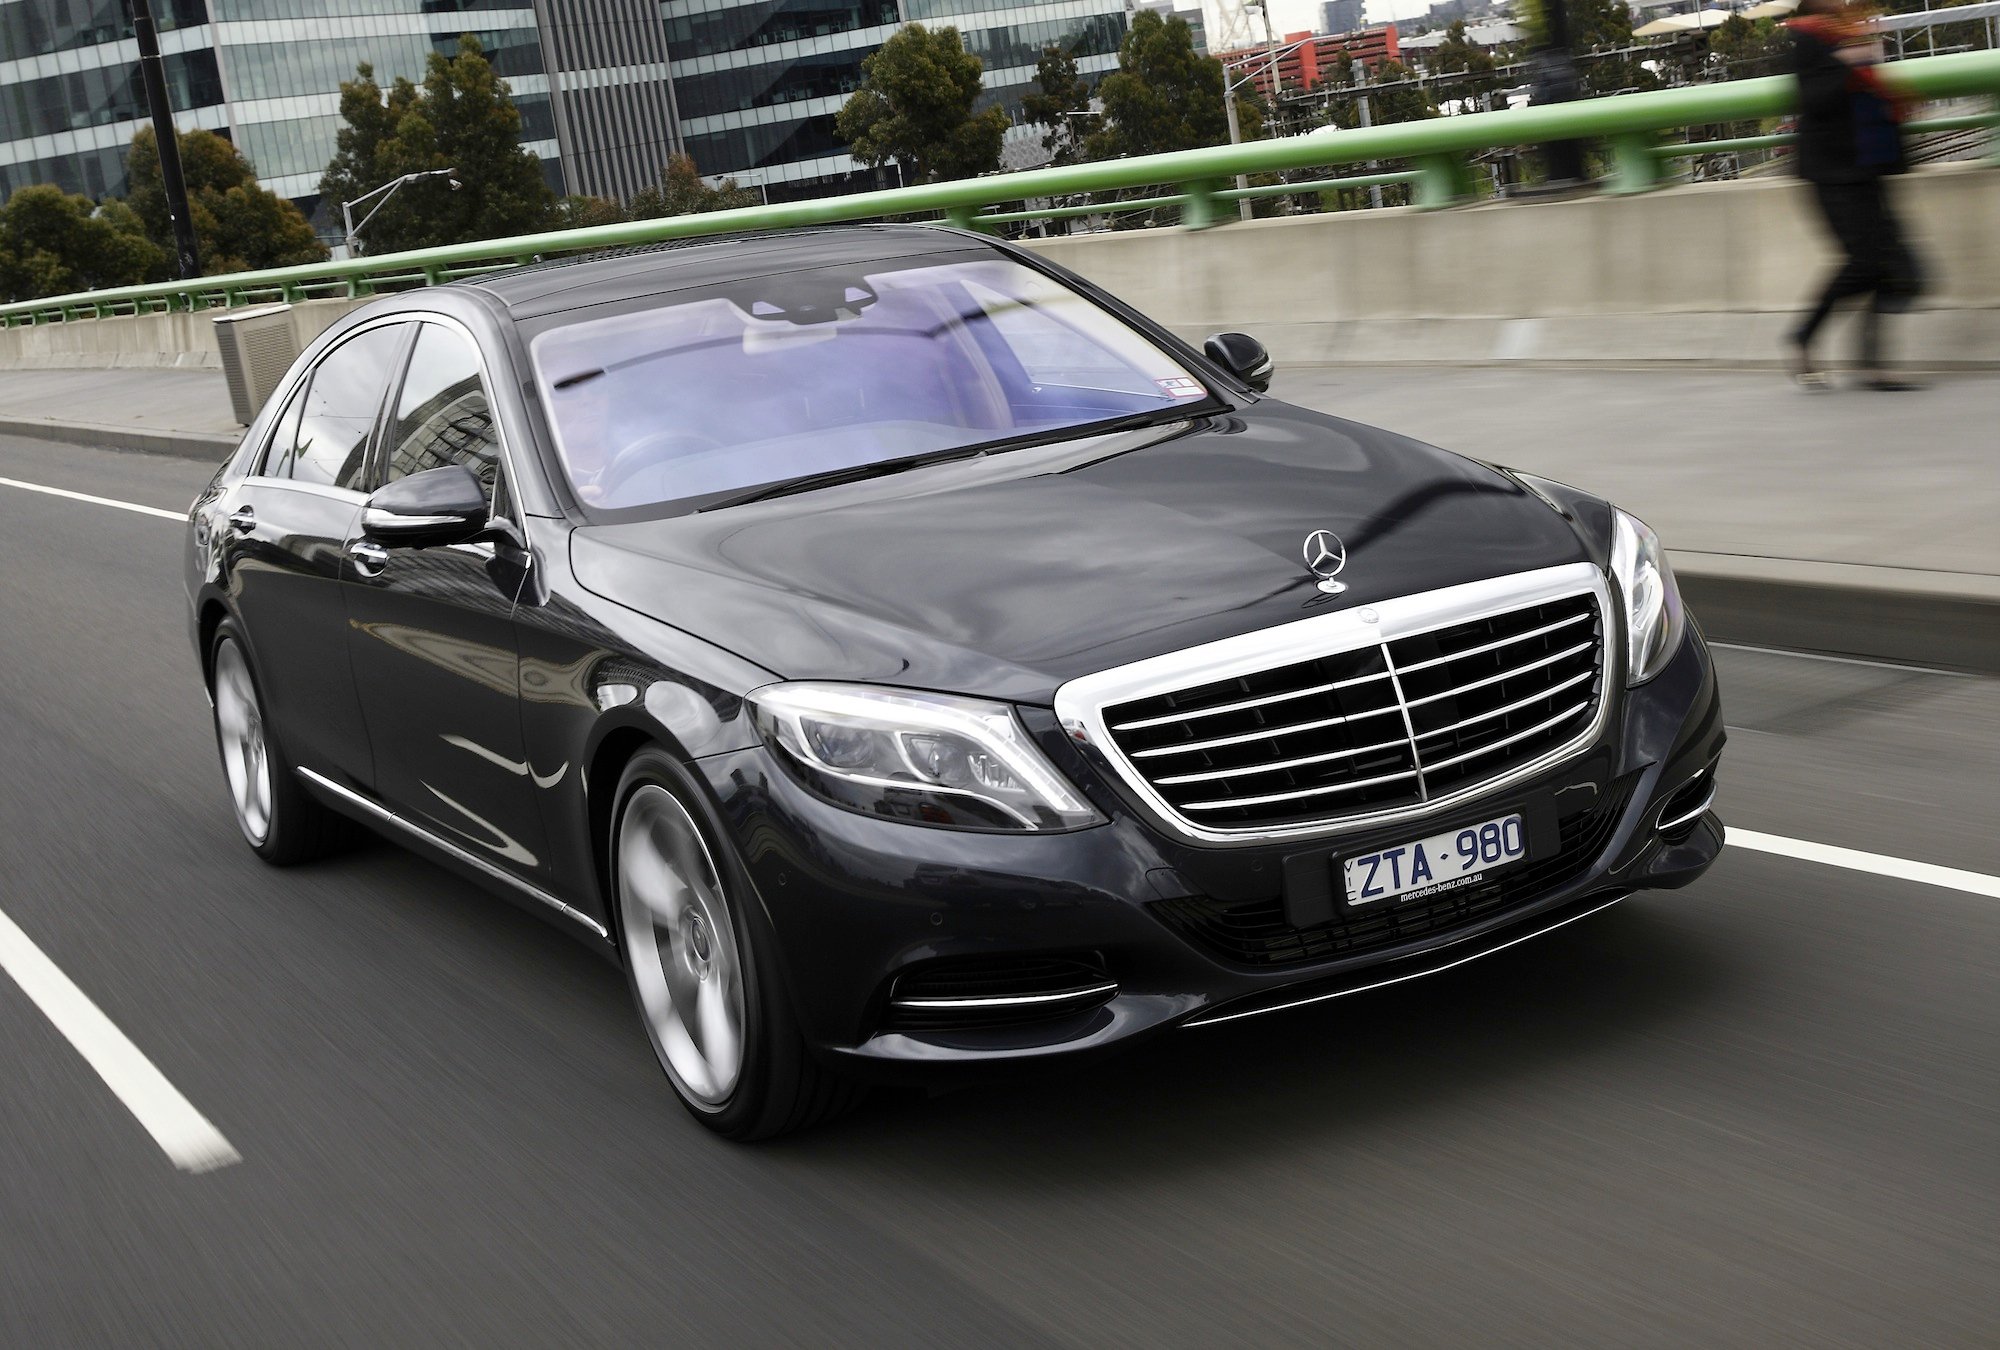 Мерседес s500 4matic. Мерседес s500 2015. Mercedes Benz s class s500.